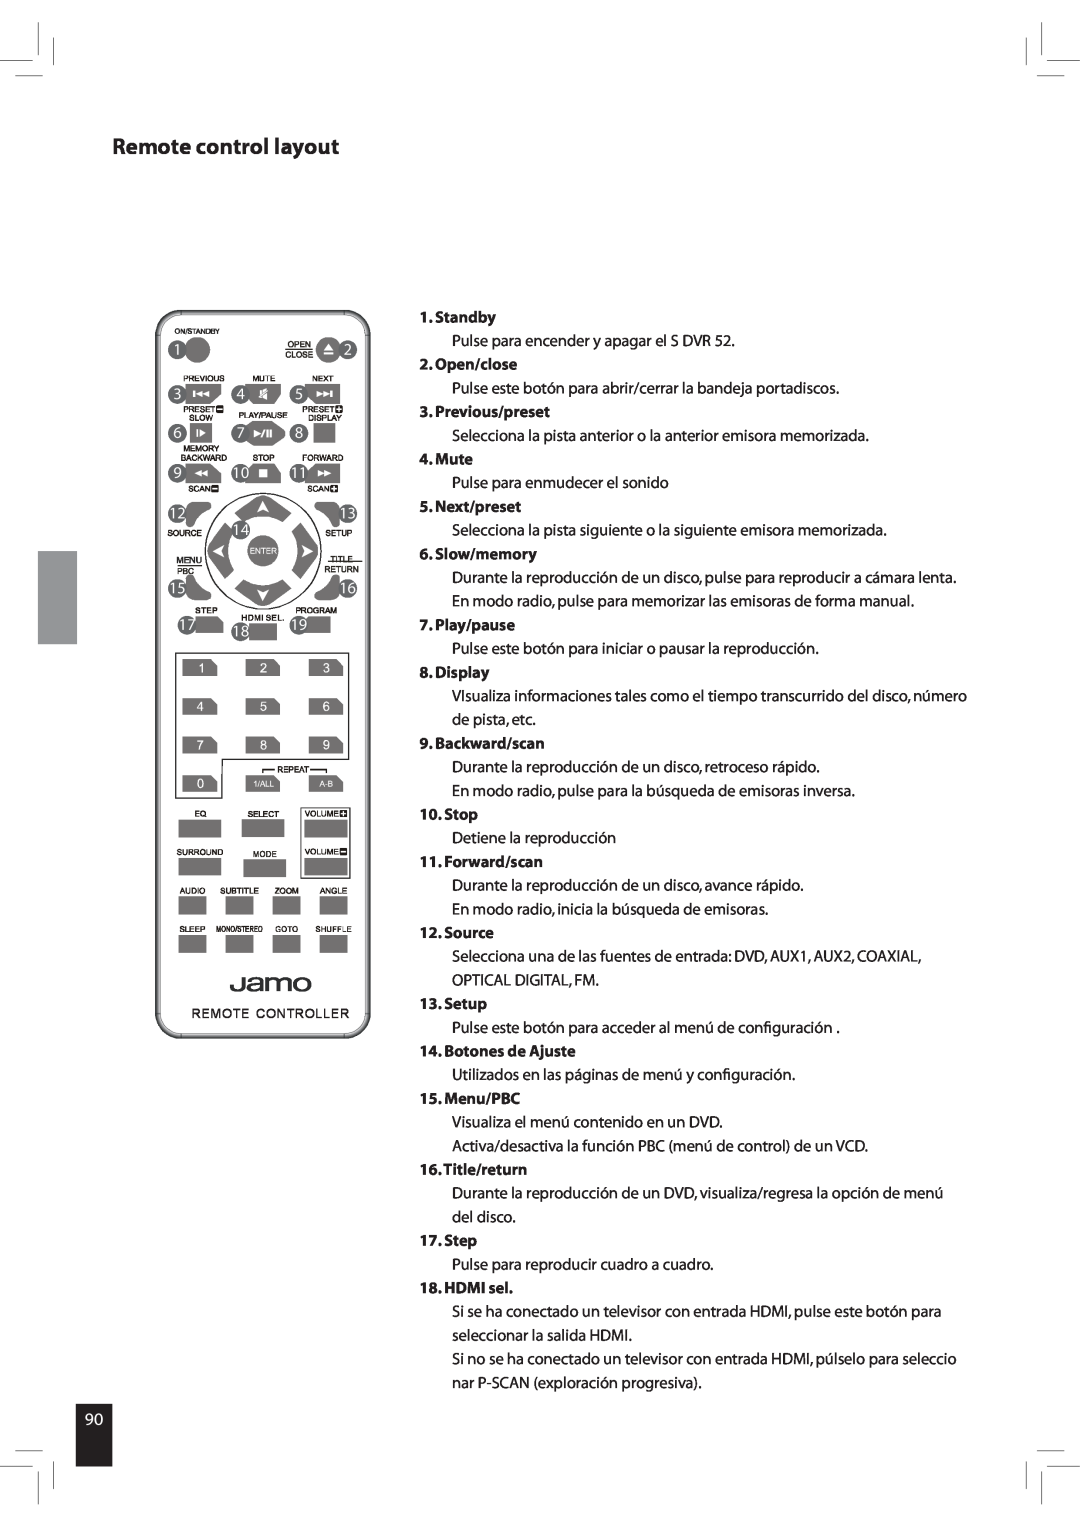 JAMO S 502 manual Remote control layout, 1516 171819, Standby 